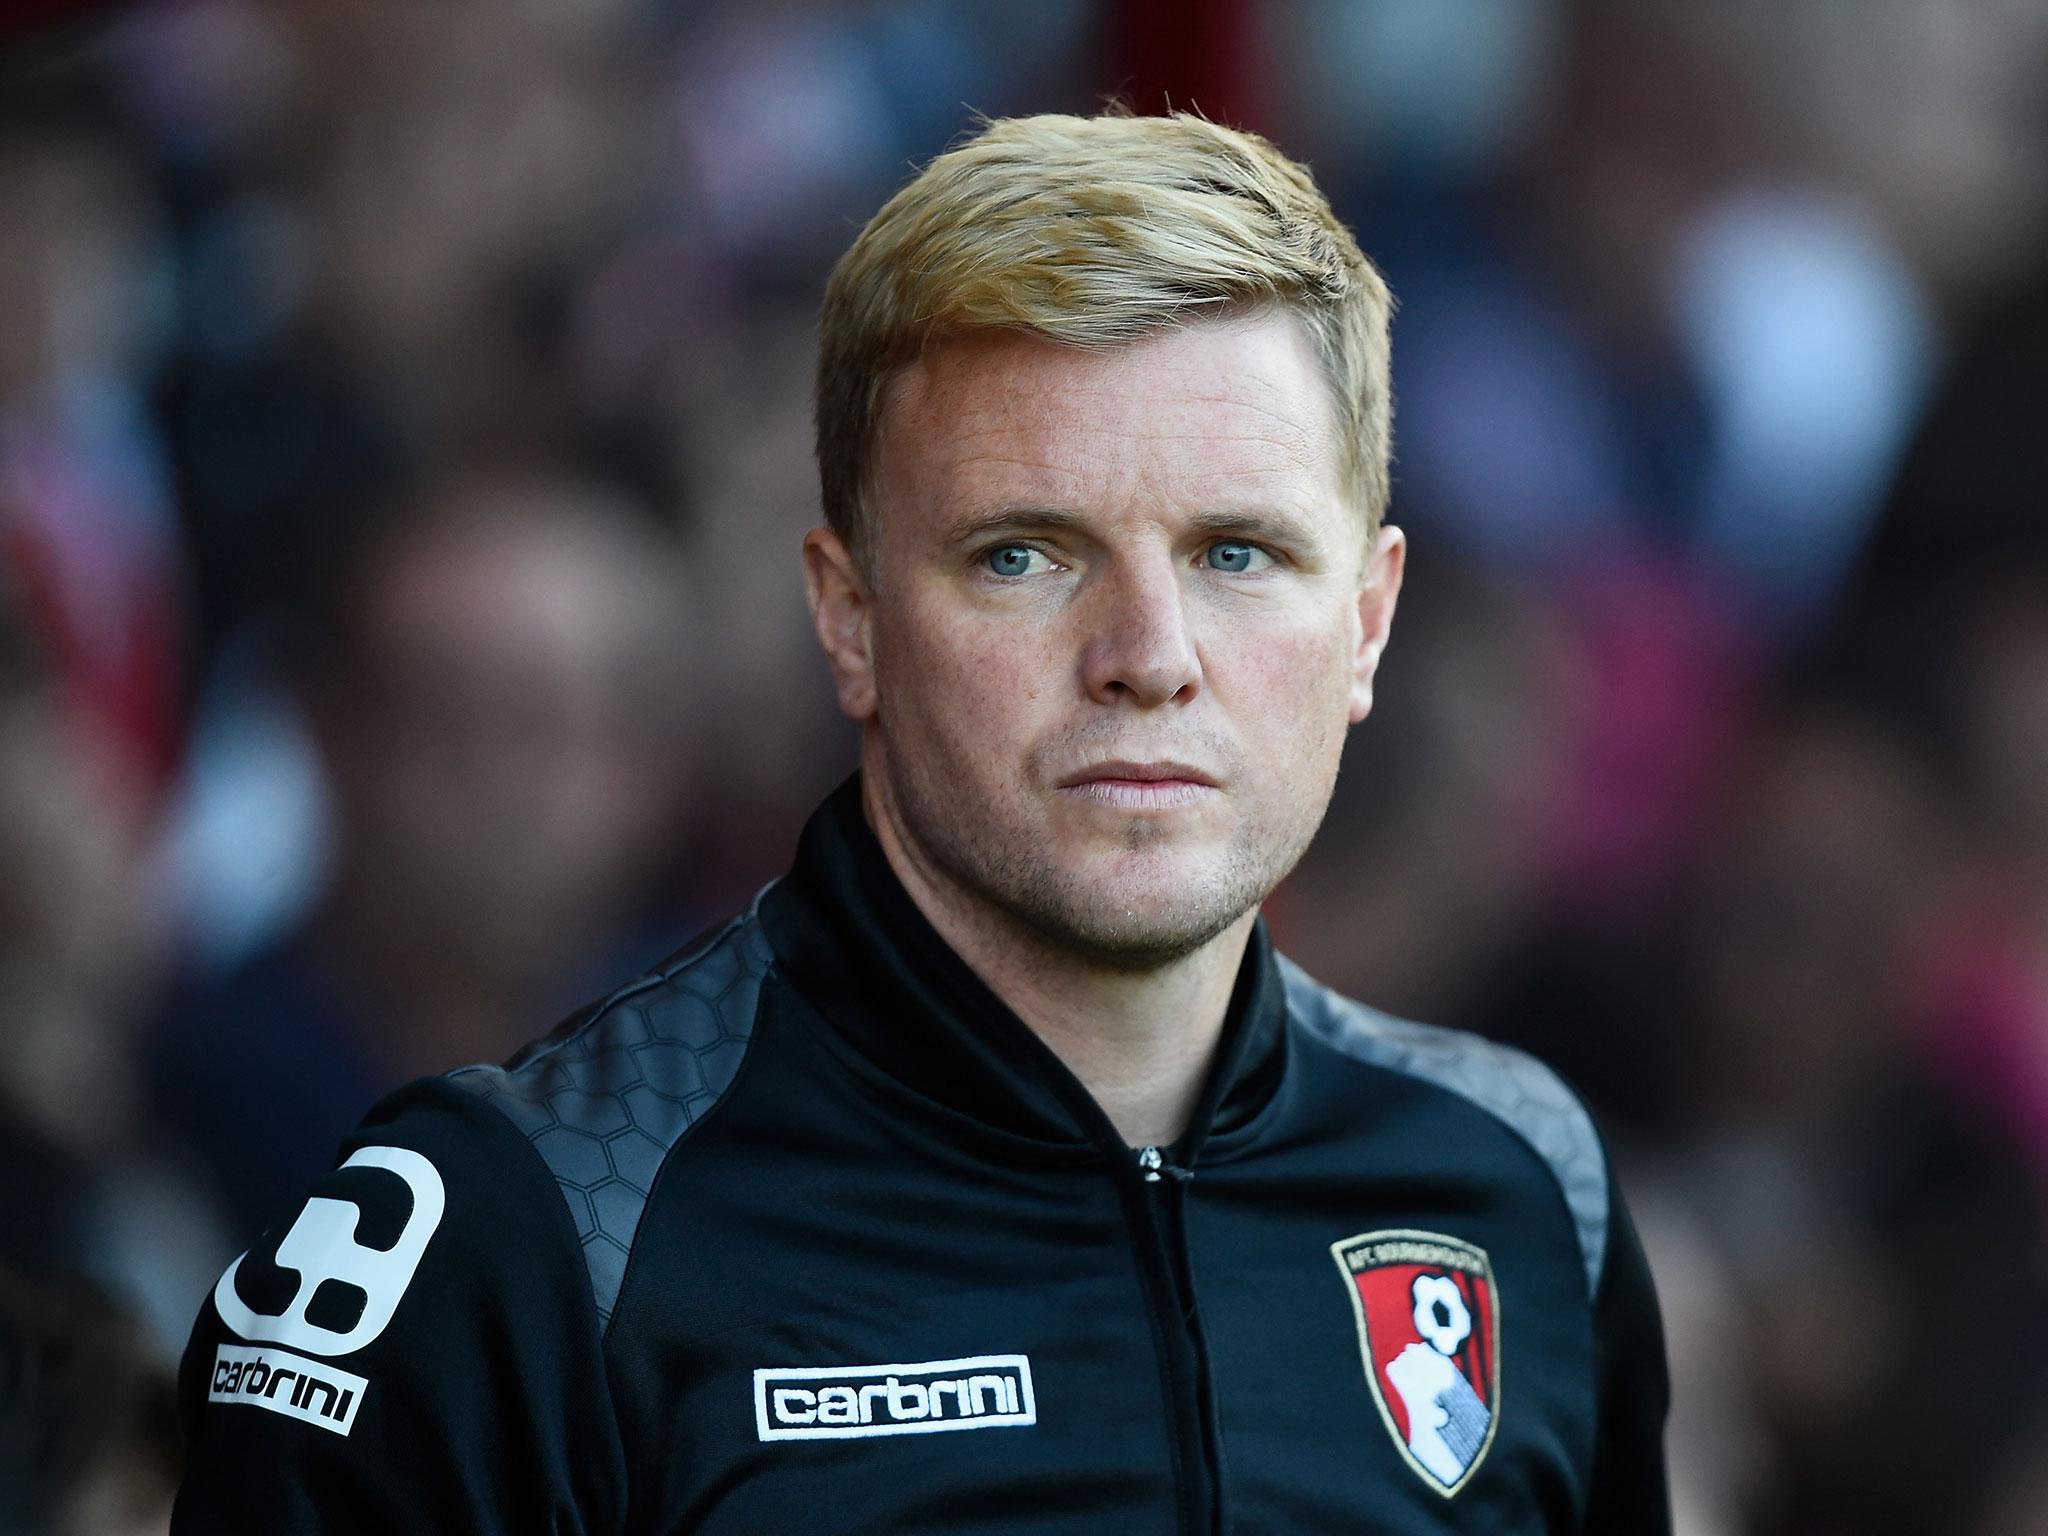 Eddie Howe's remarkable success with Bournemouth has seen him tipped as one for the future